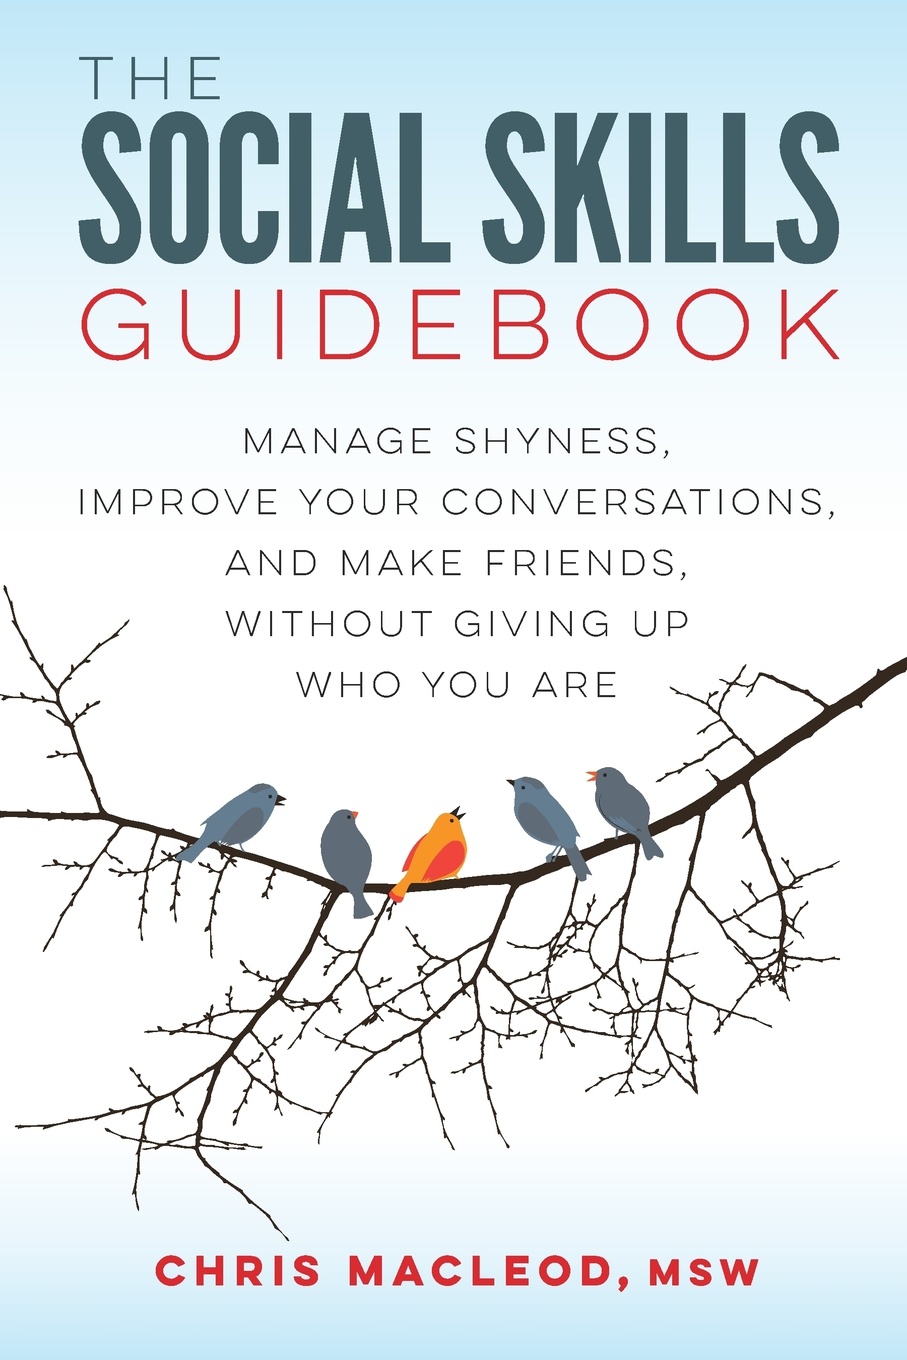 The Social Skills Guidebook. Manage Shyness, Improve Your Conversations, and Make Friends, Without Giving Up Who You Are